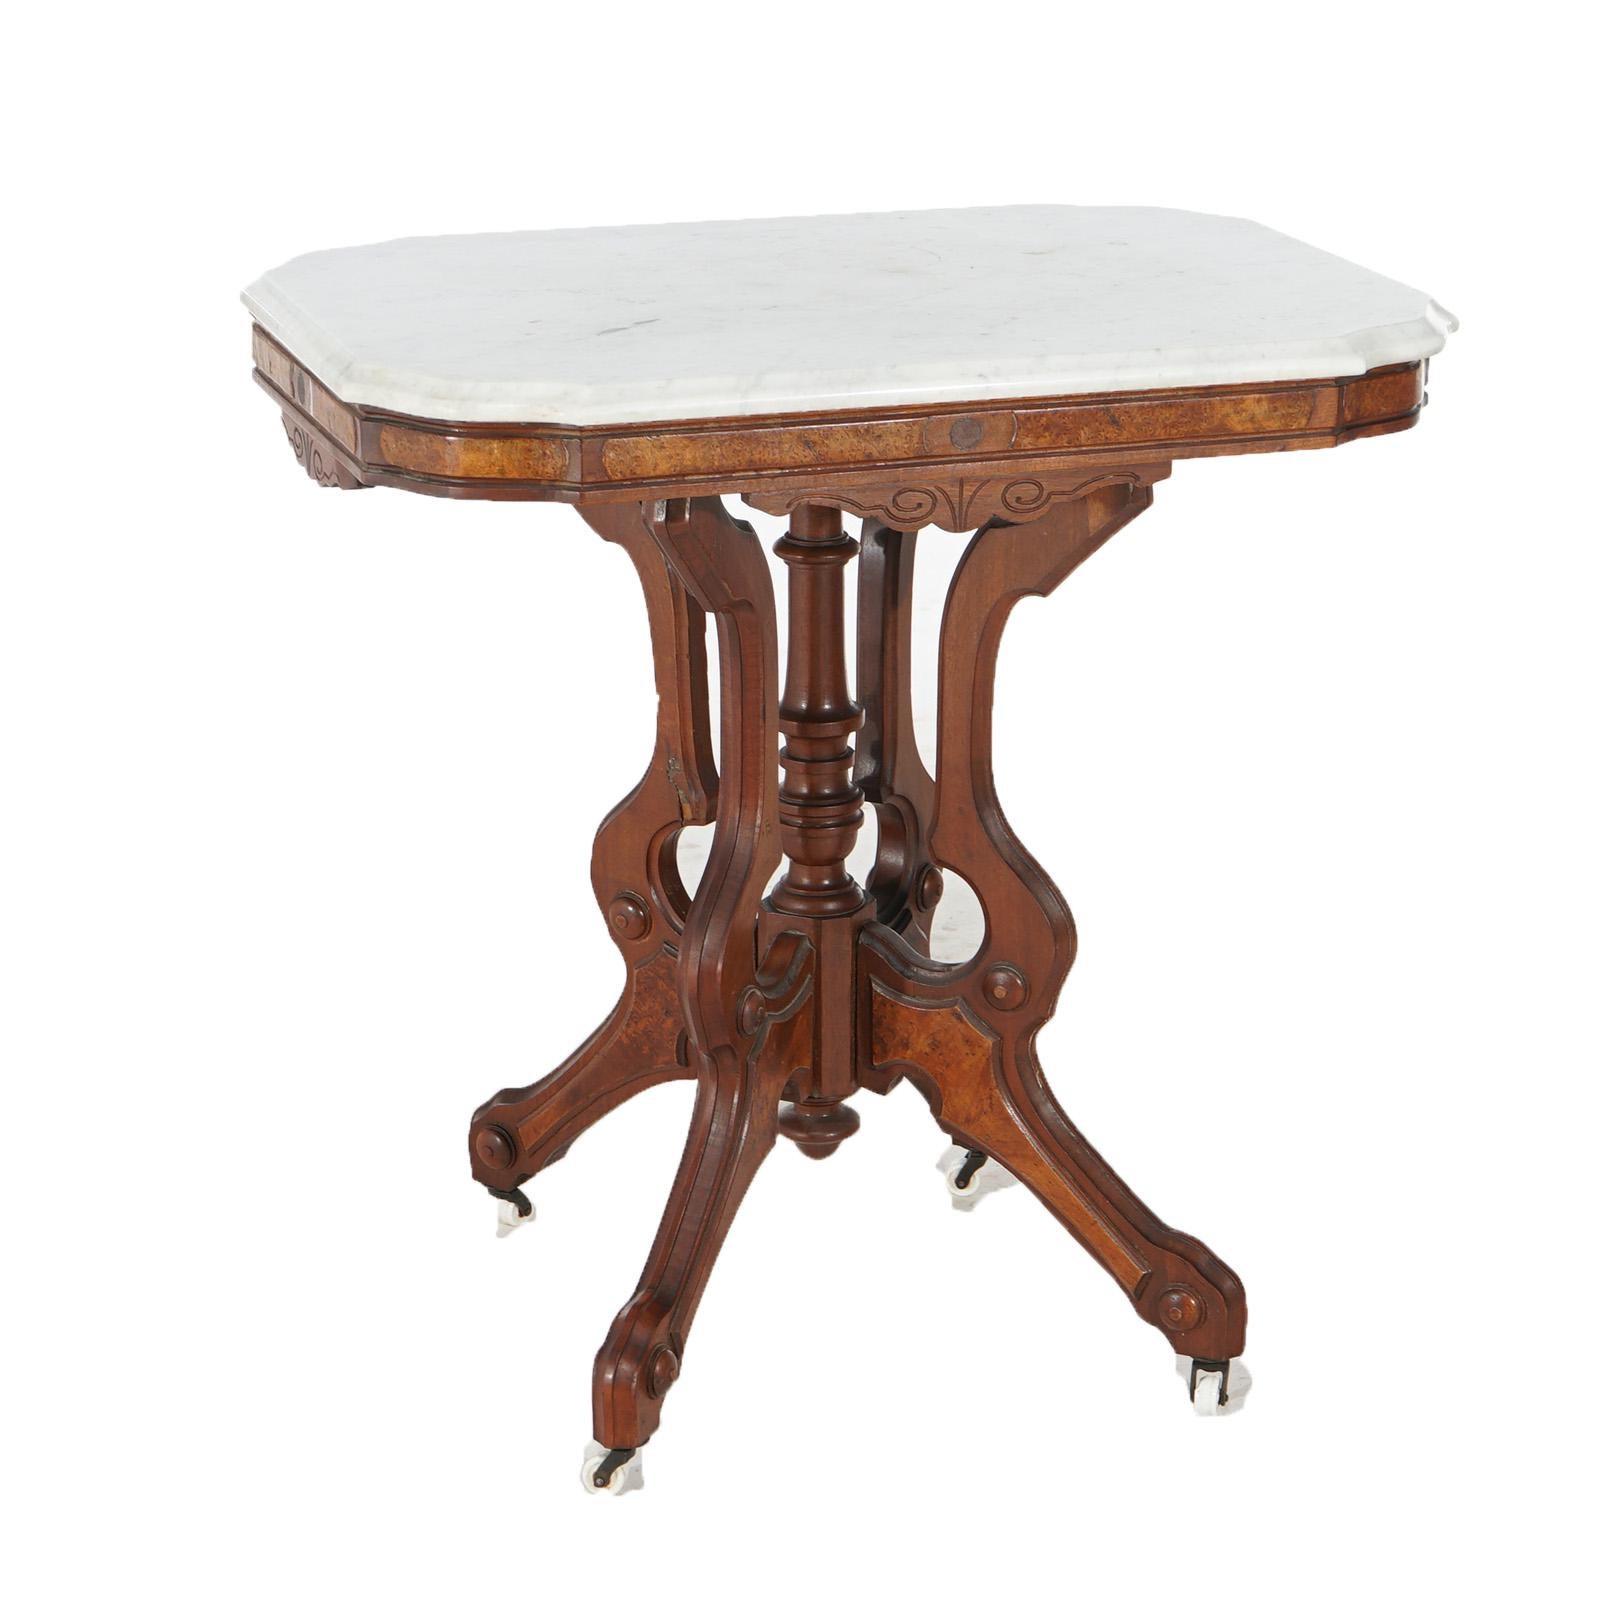 AN antique Eastlake parlor table offers shaped and beveled marble top over walnut base having burl insets, a central turned column and raised on stylized scroll form legs, c1880

Measures - 30.75